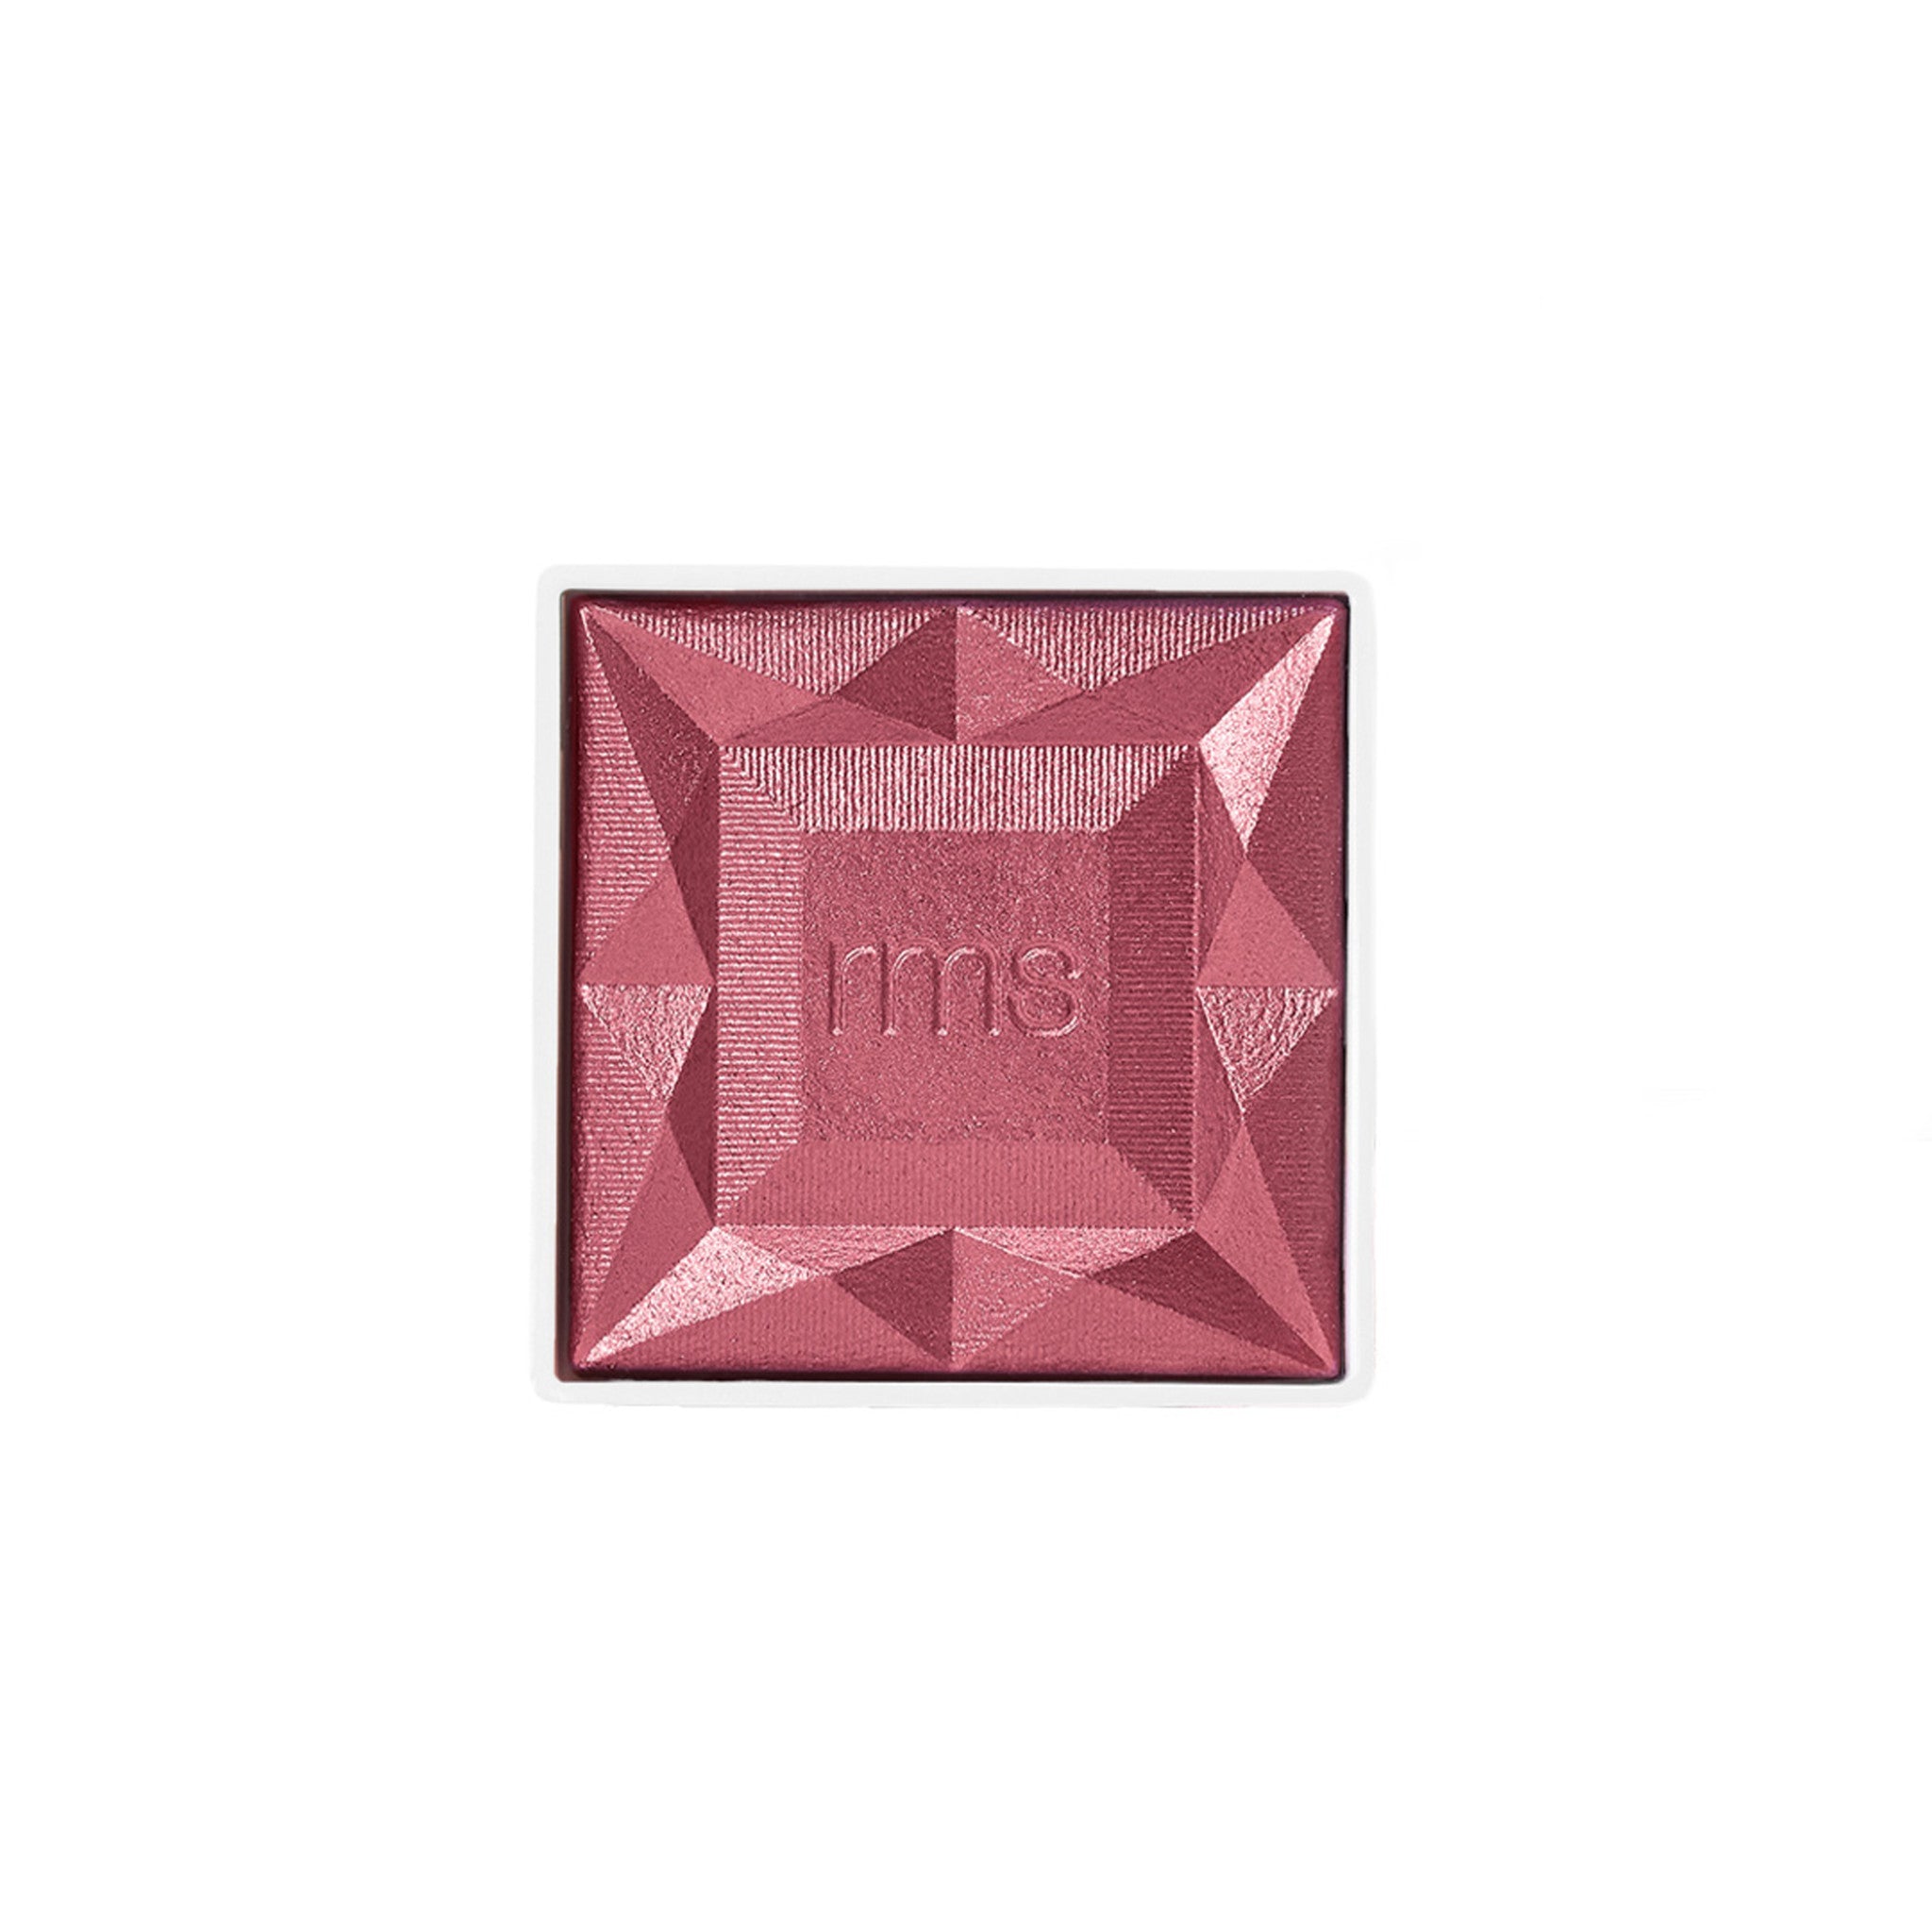 RMS Beauty ReDimension Hydra Powder Blush Refill Color/Shade variant: Hanky Panky main image. This product is in the color purple